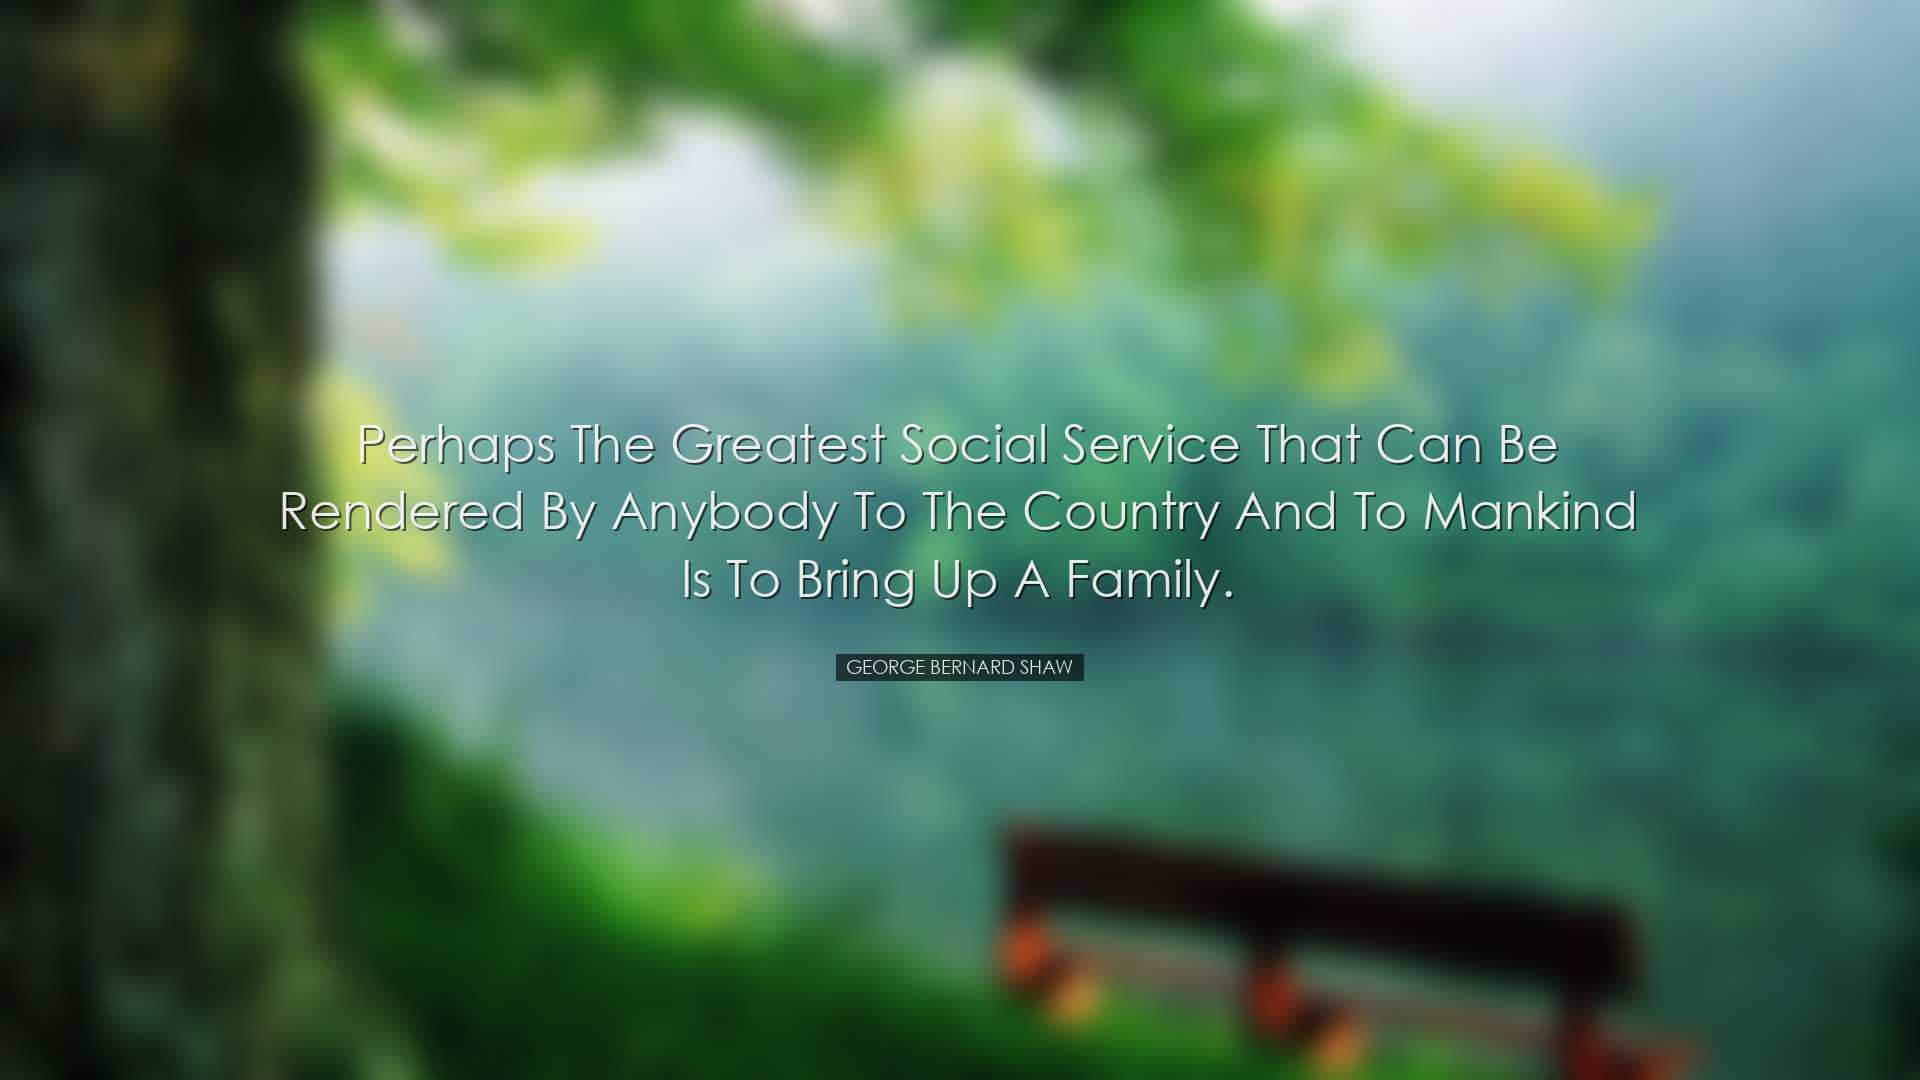 Perhaps the greatest social service that can be rendered by anybod